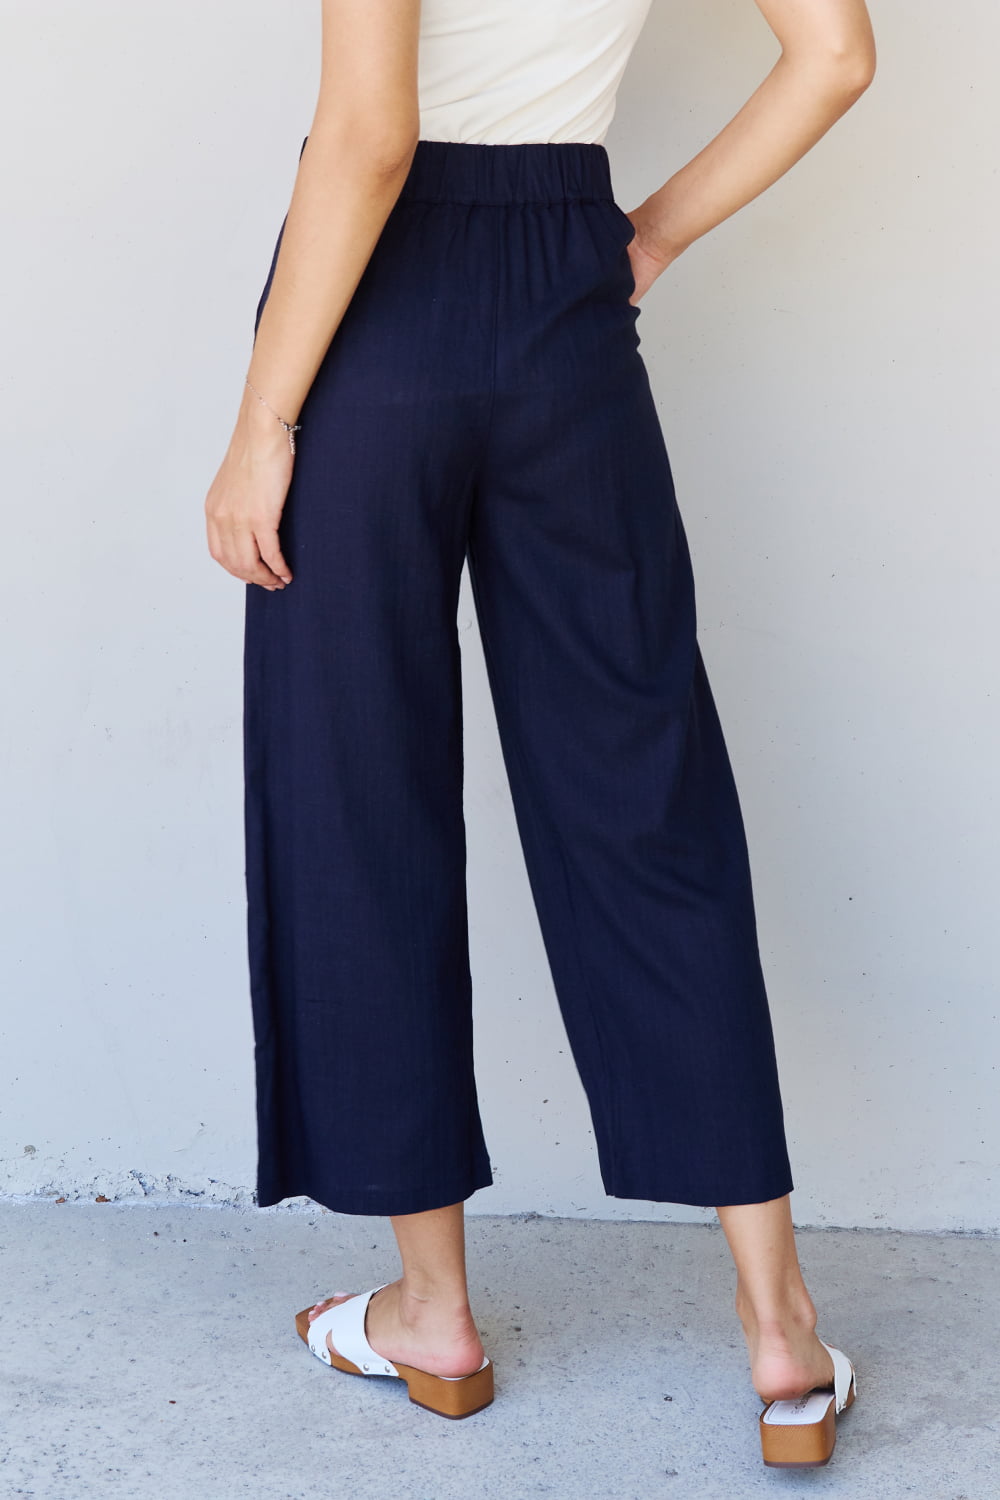 In The Mix Full Size Pleated Detail Linen Pants in Dark Navy - Bottoms - Pants - 2 - 2024